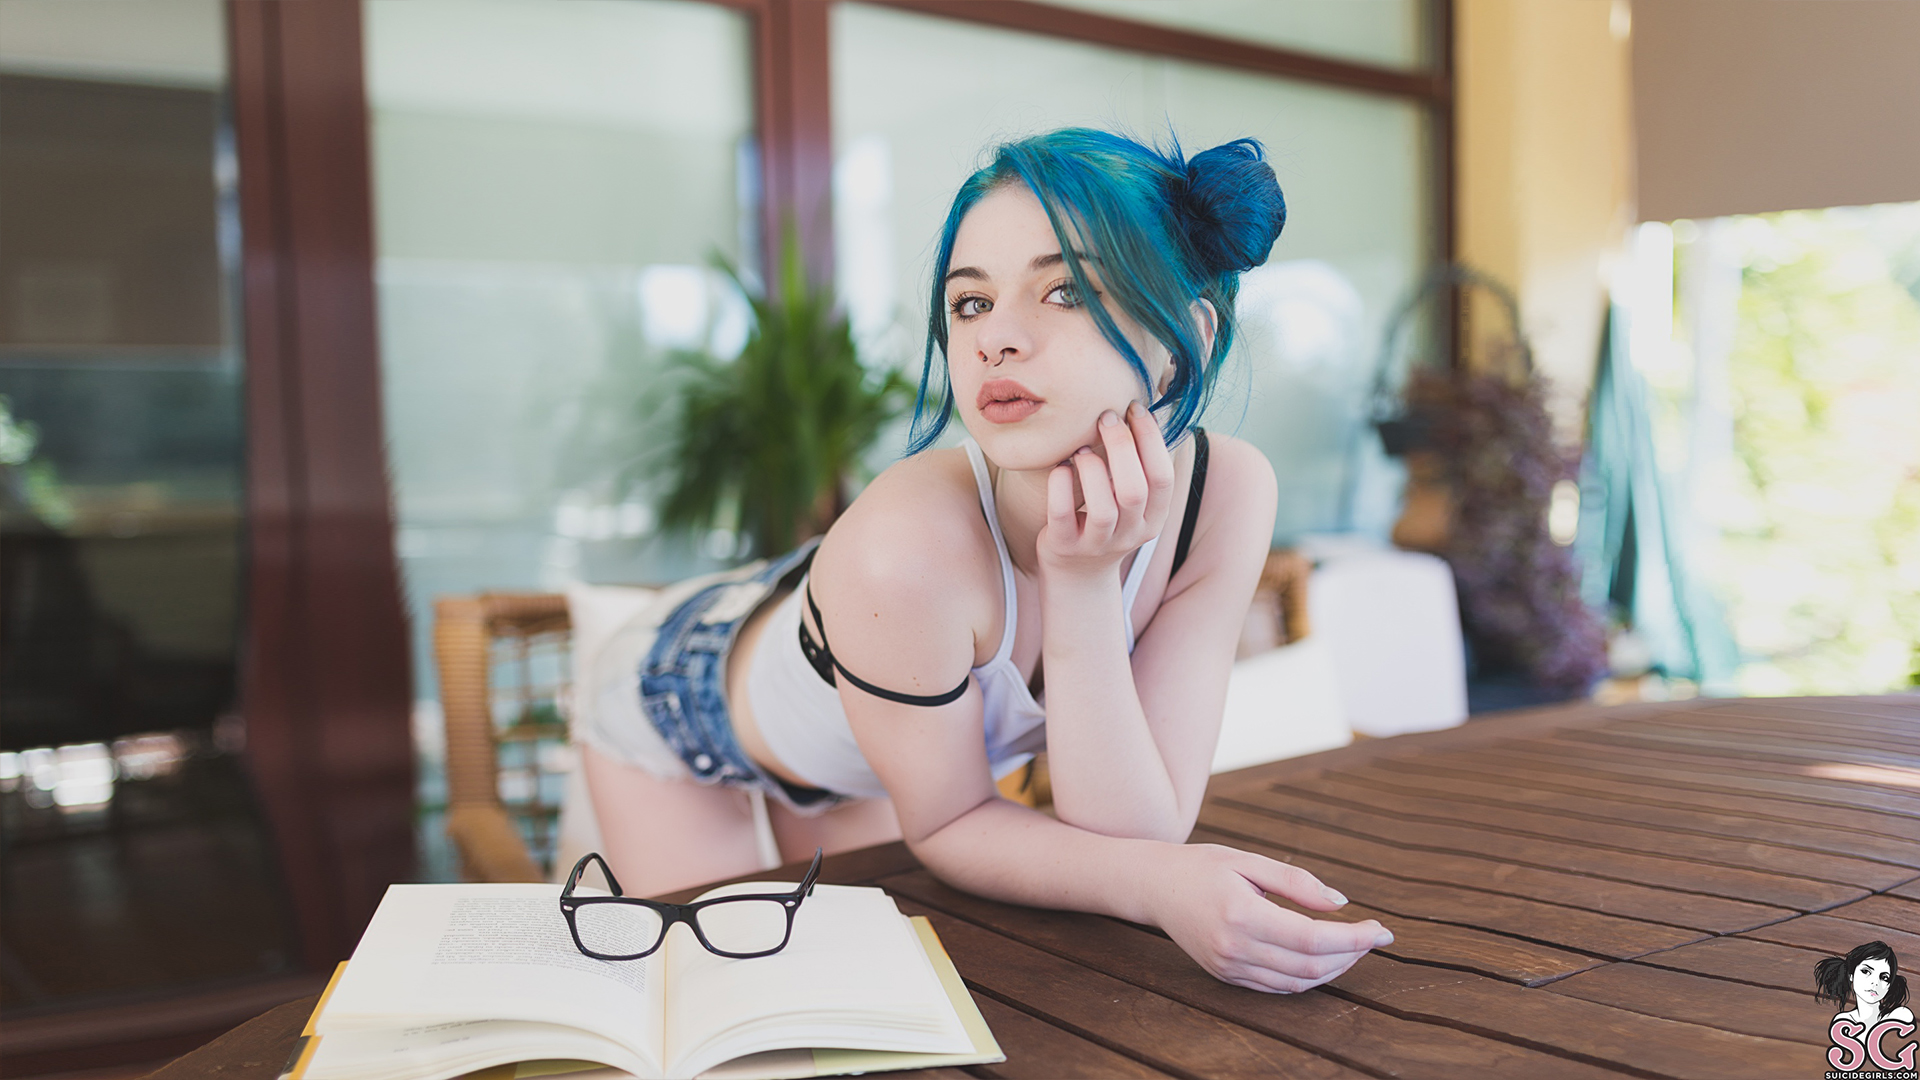 People 1920x1080 Suicide Girls Kuroha Suicide pornstar women nose ring women with glasses bent over dyed hair table books blue hair closeup watermarked